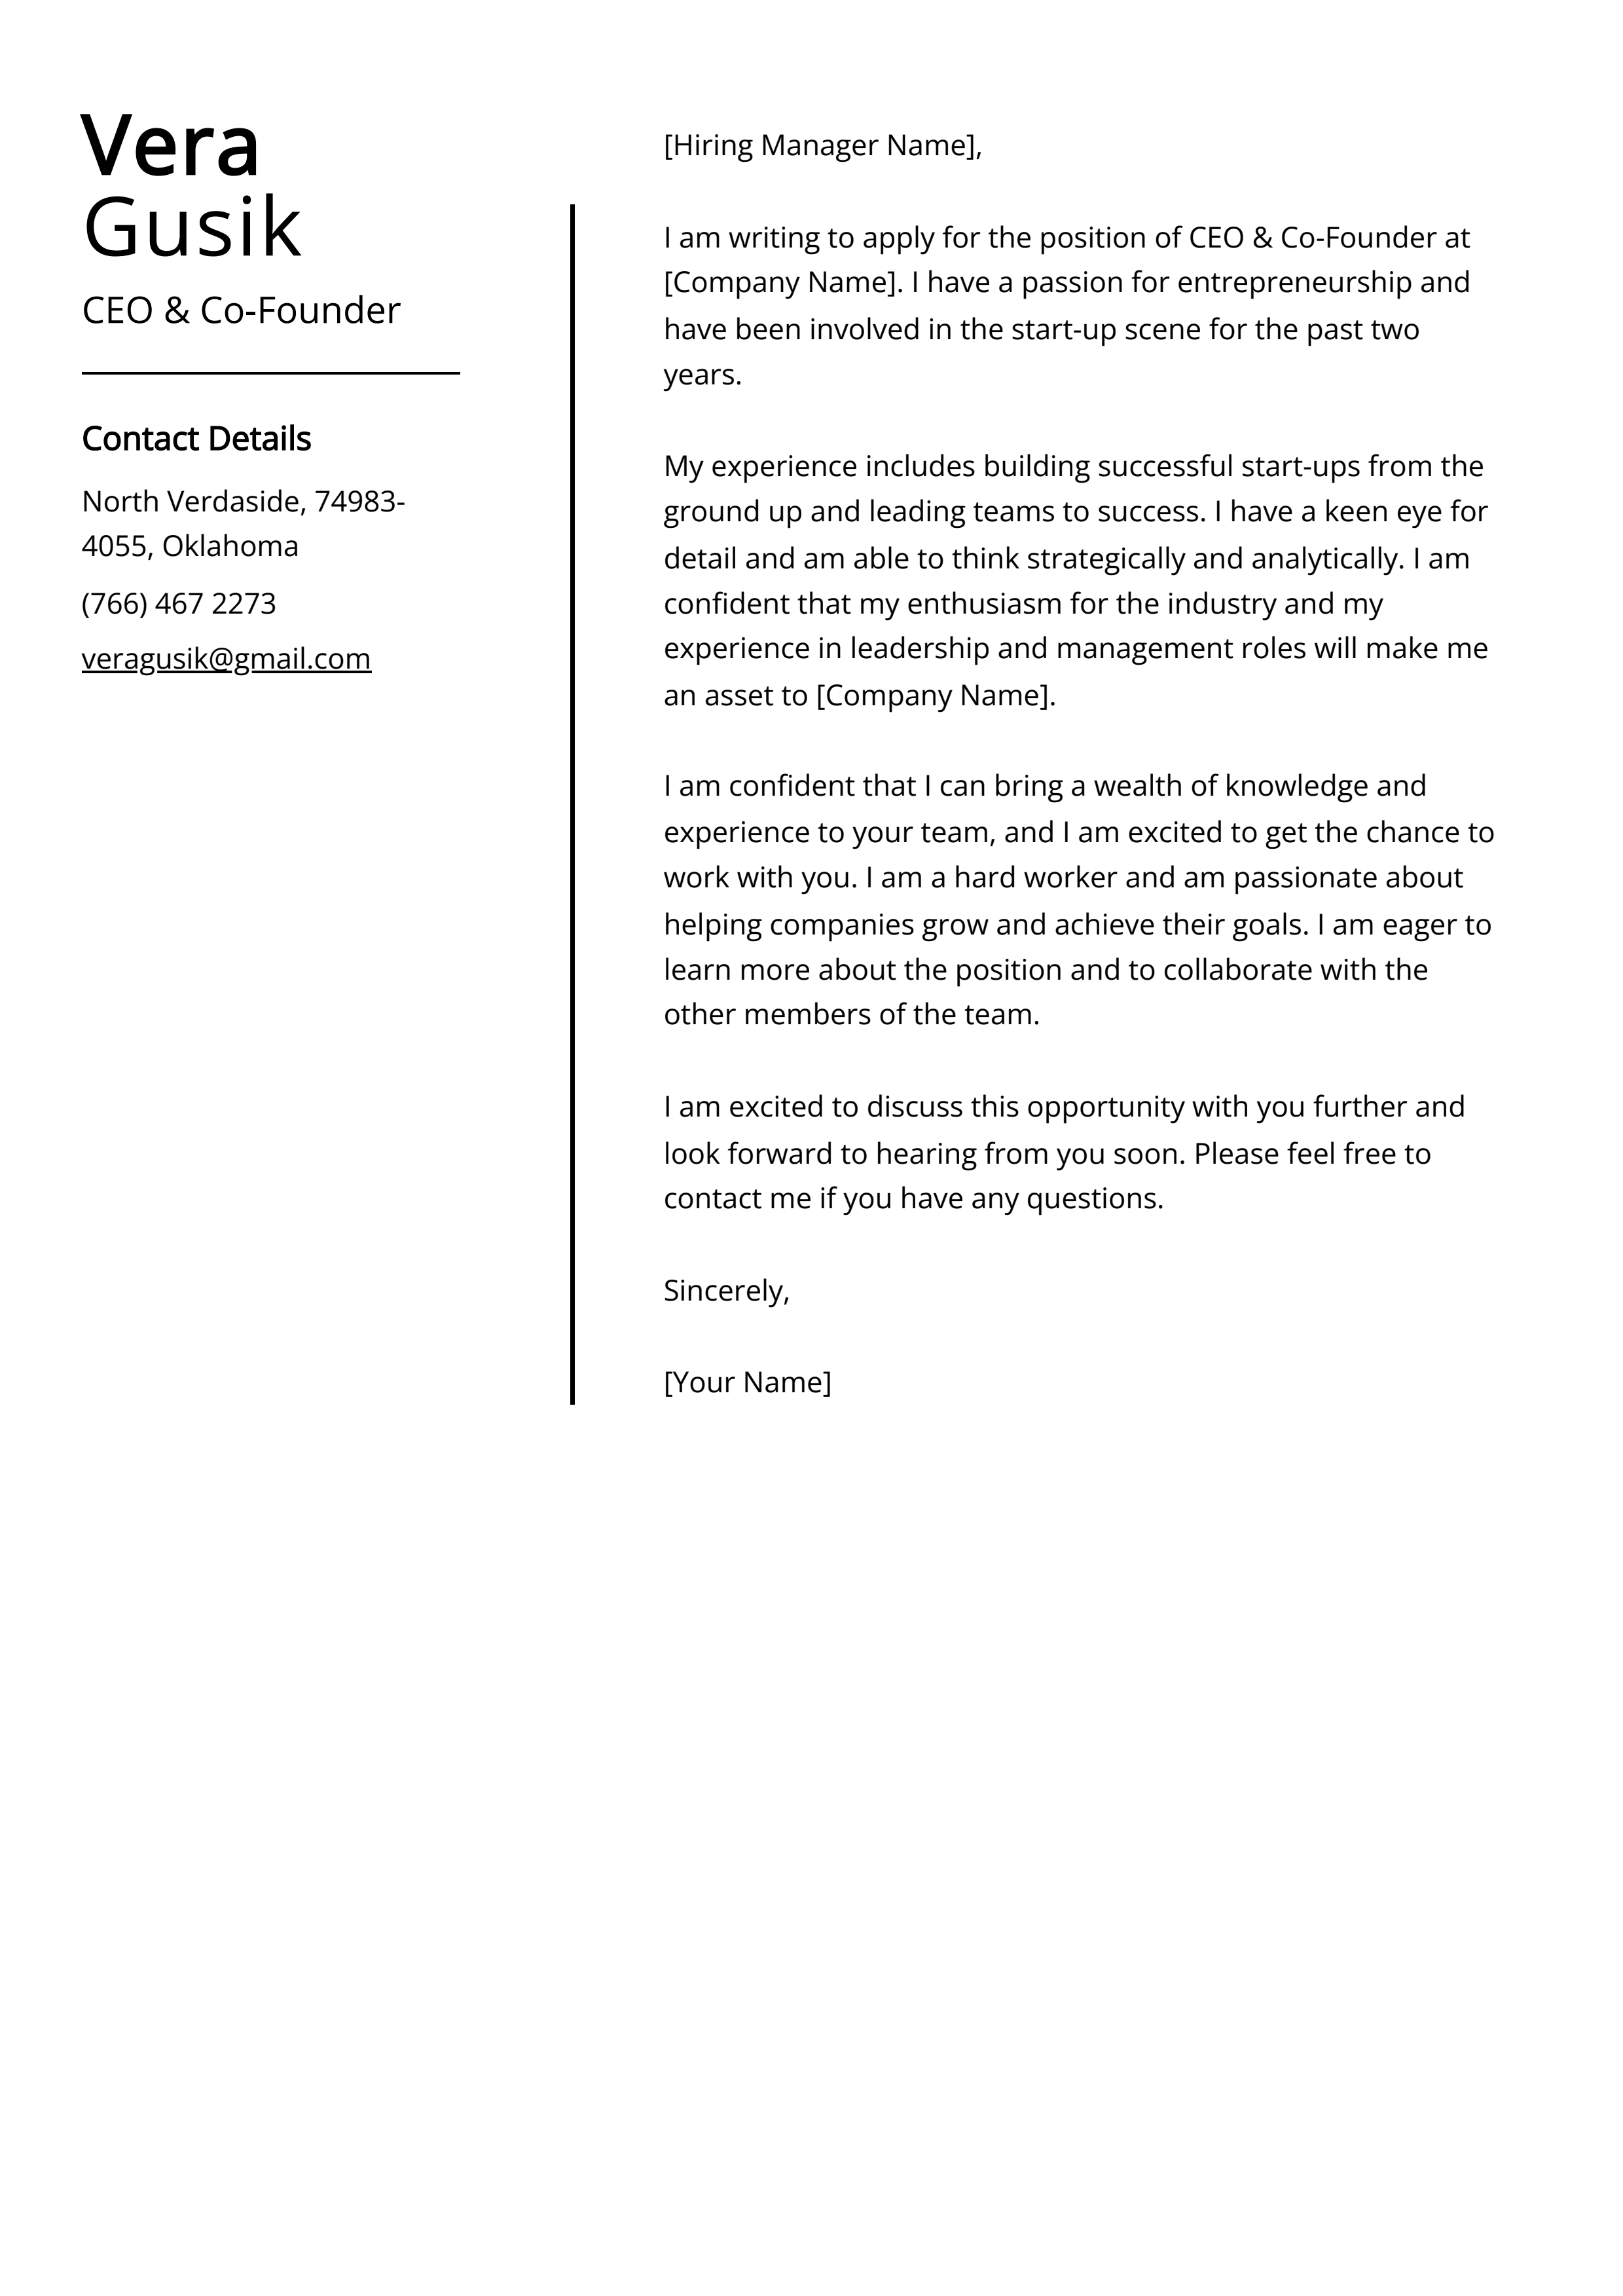 CEO & Co-Founder Cover Letter Example